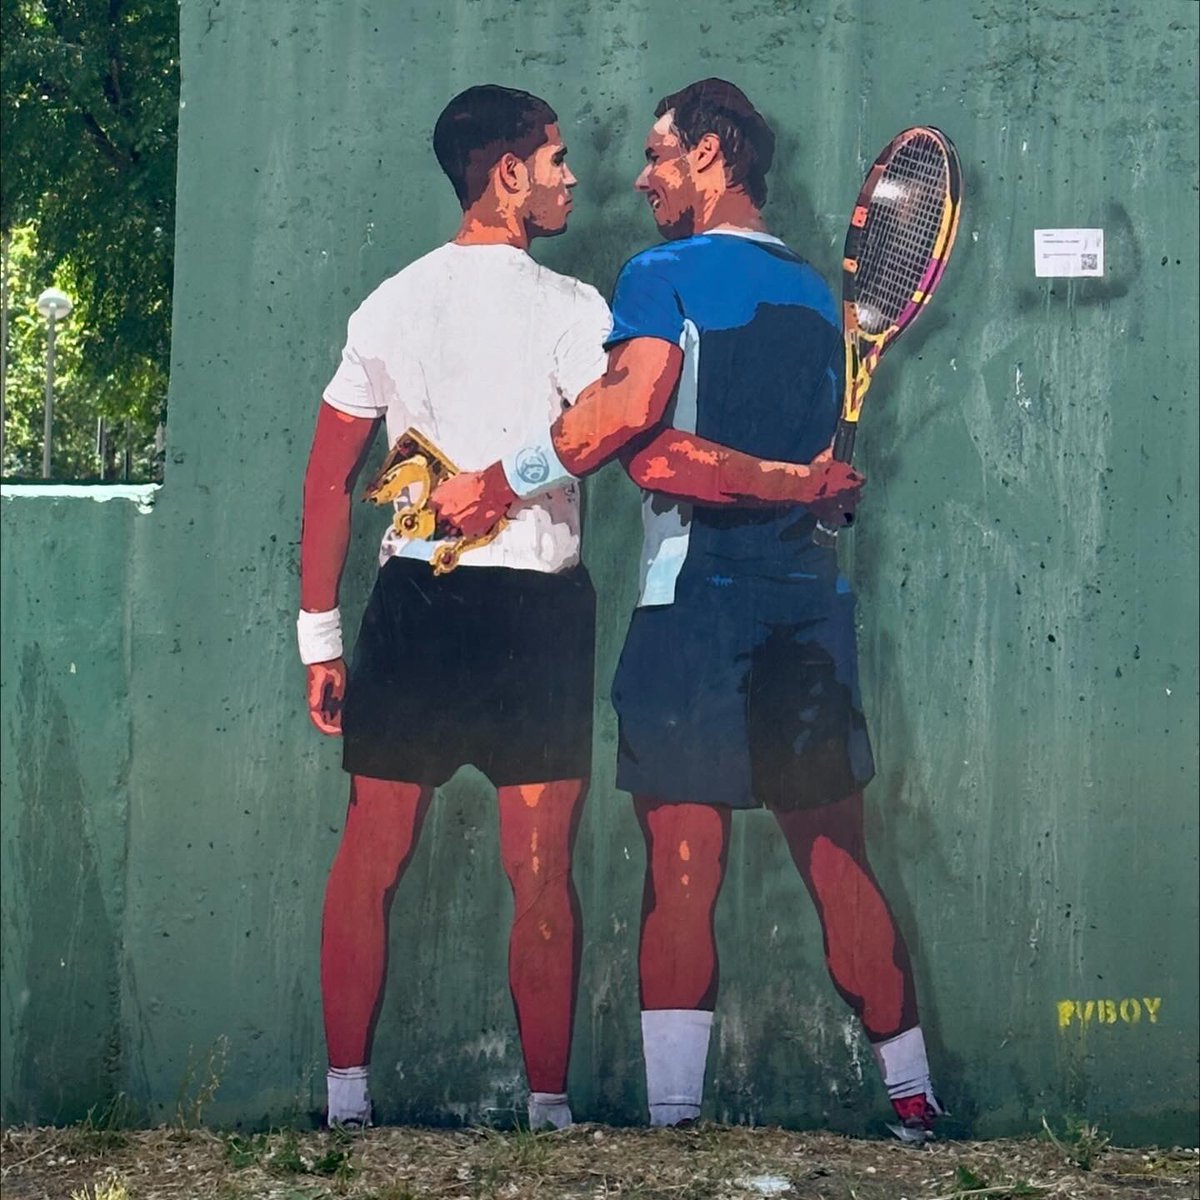 Carlos Alcaraz had the chance to pass Rafa Nadal’s record today for the longest win streak in Madrid. But instead, they stay tied at 14 wins. In a way, it’s poetic for them to share this accomplishment. Rafa gave so much to Spanish tennis. Carlos is on his journey to do the…